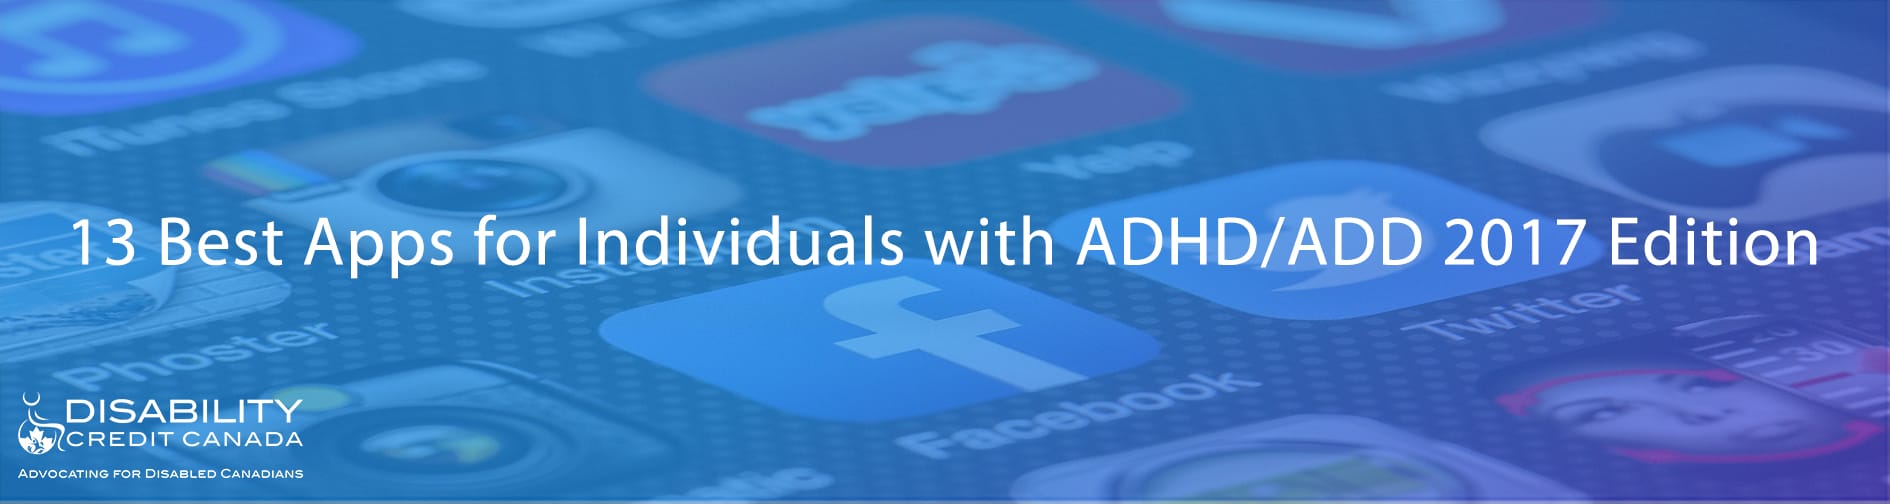 Apps for Individuals with ADHD/ADD